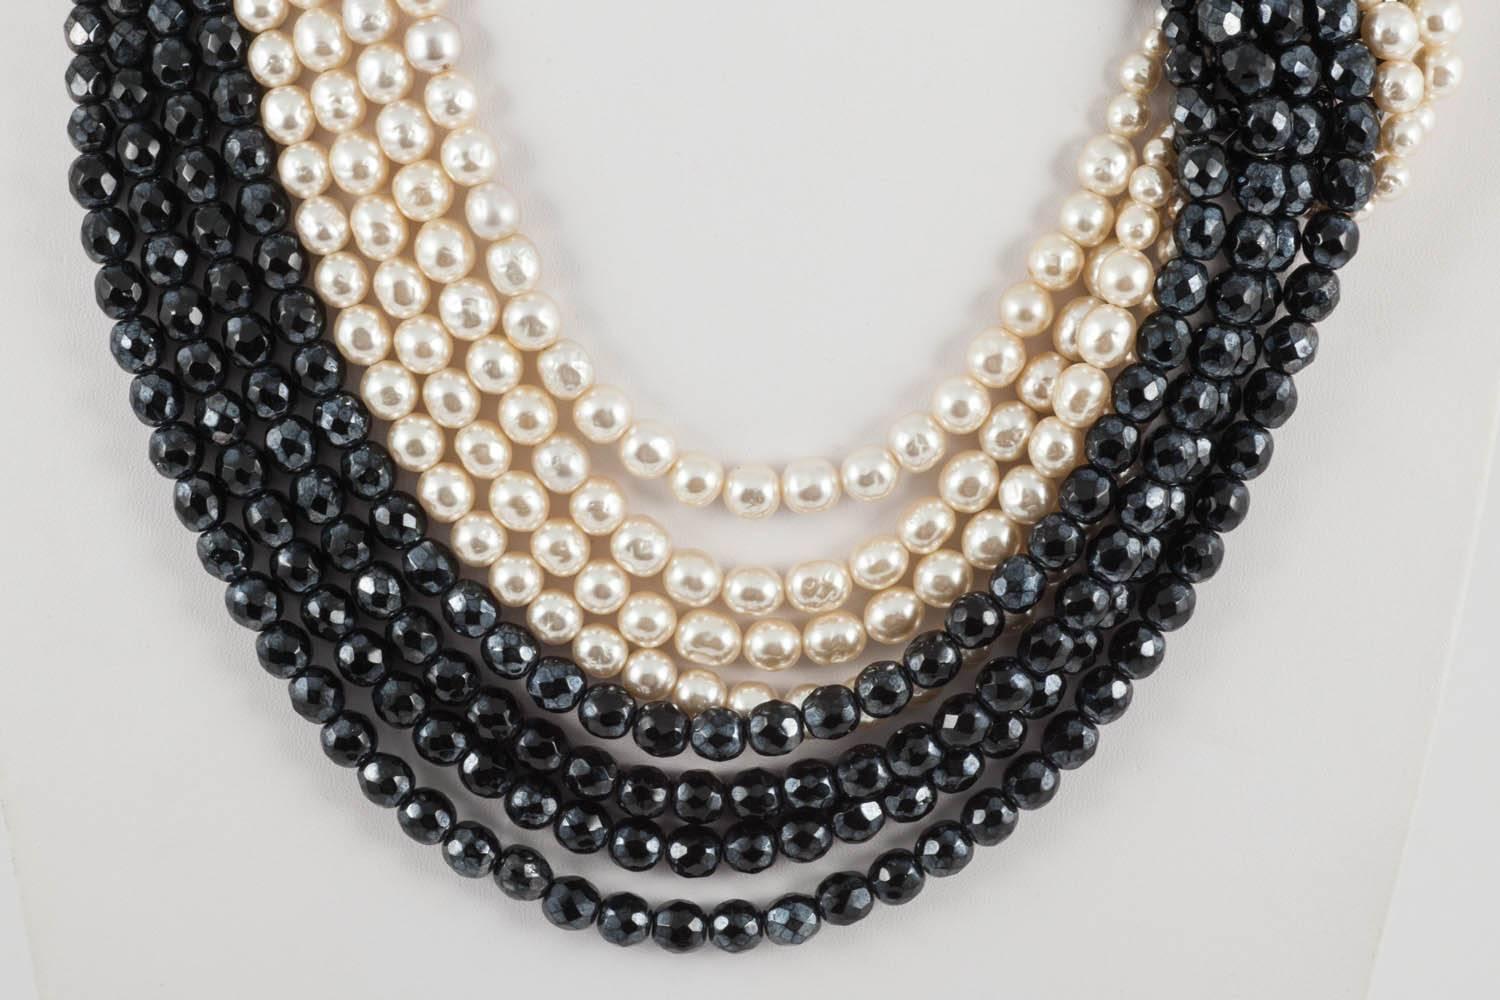 A wonderfully stylish and glamourous necklace from Coppola e Toppo,  featuring a beautiful 'twist' between the two elements of half crystal faceted beads and glass baroque pearls, a wonder of design and structure. Highly collectable and